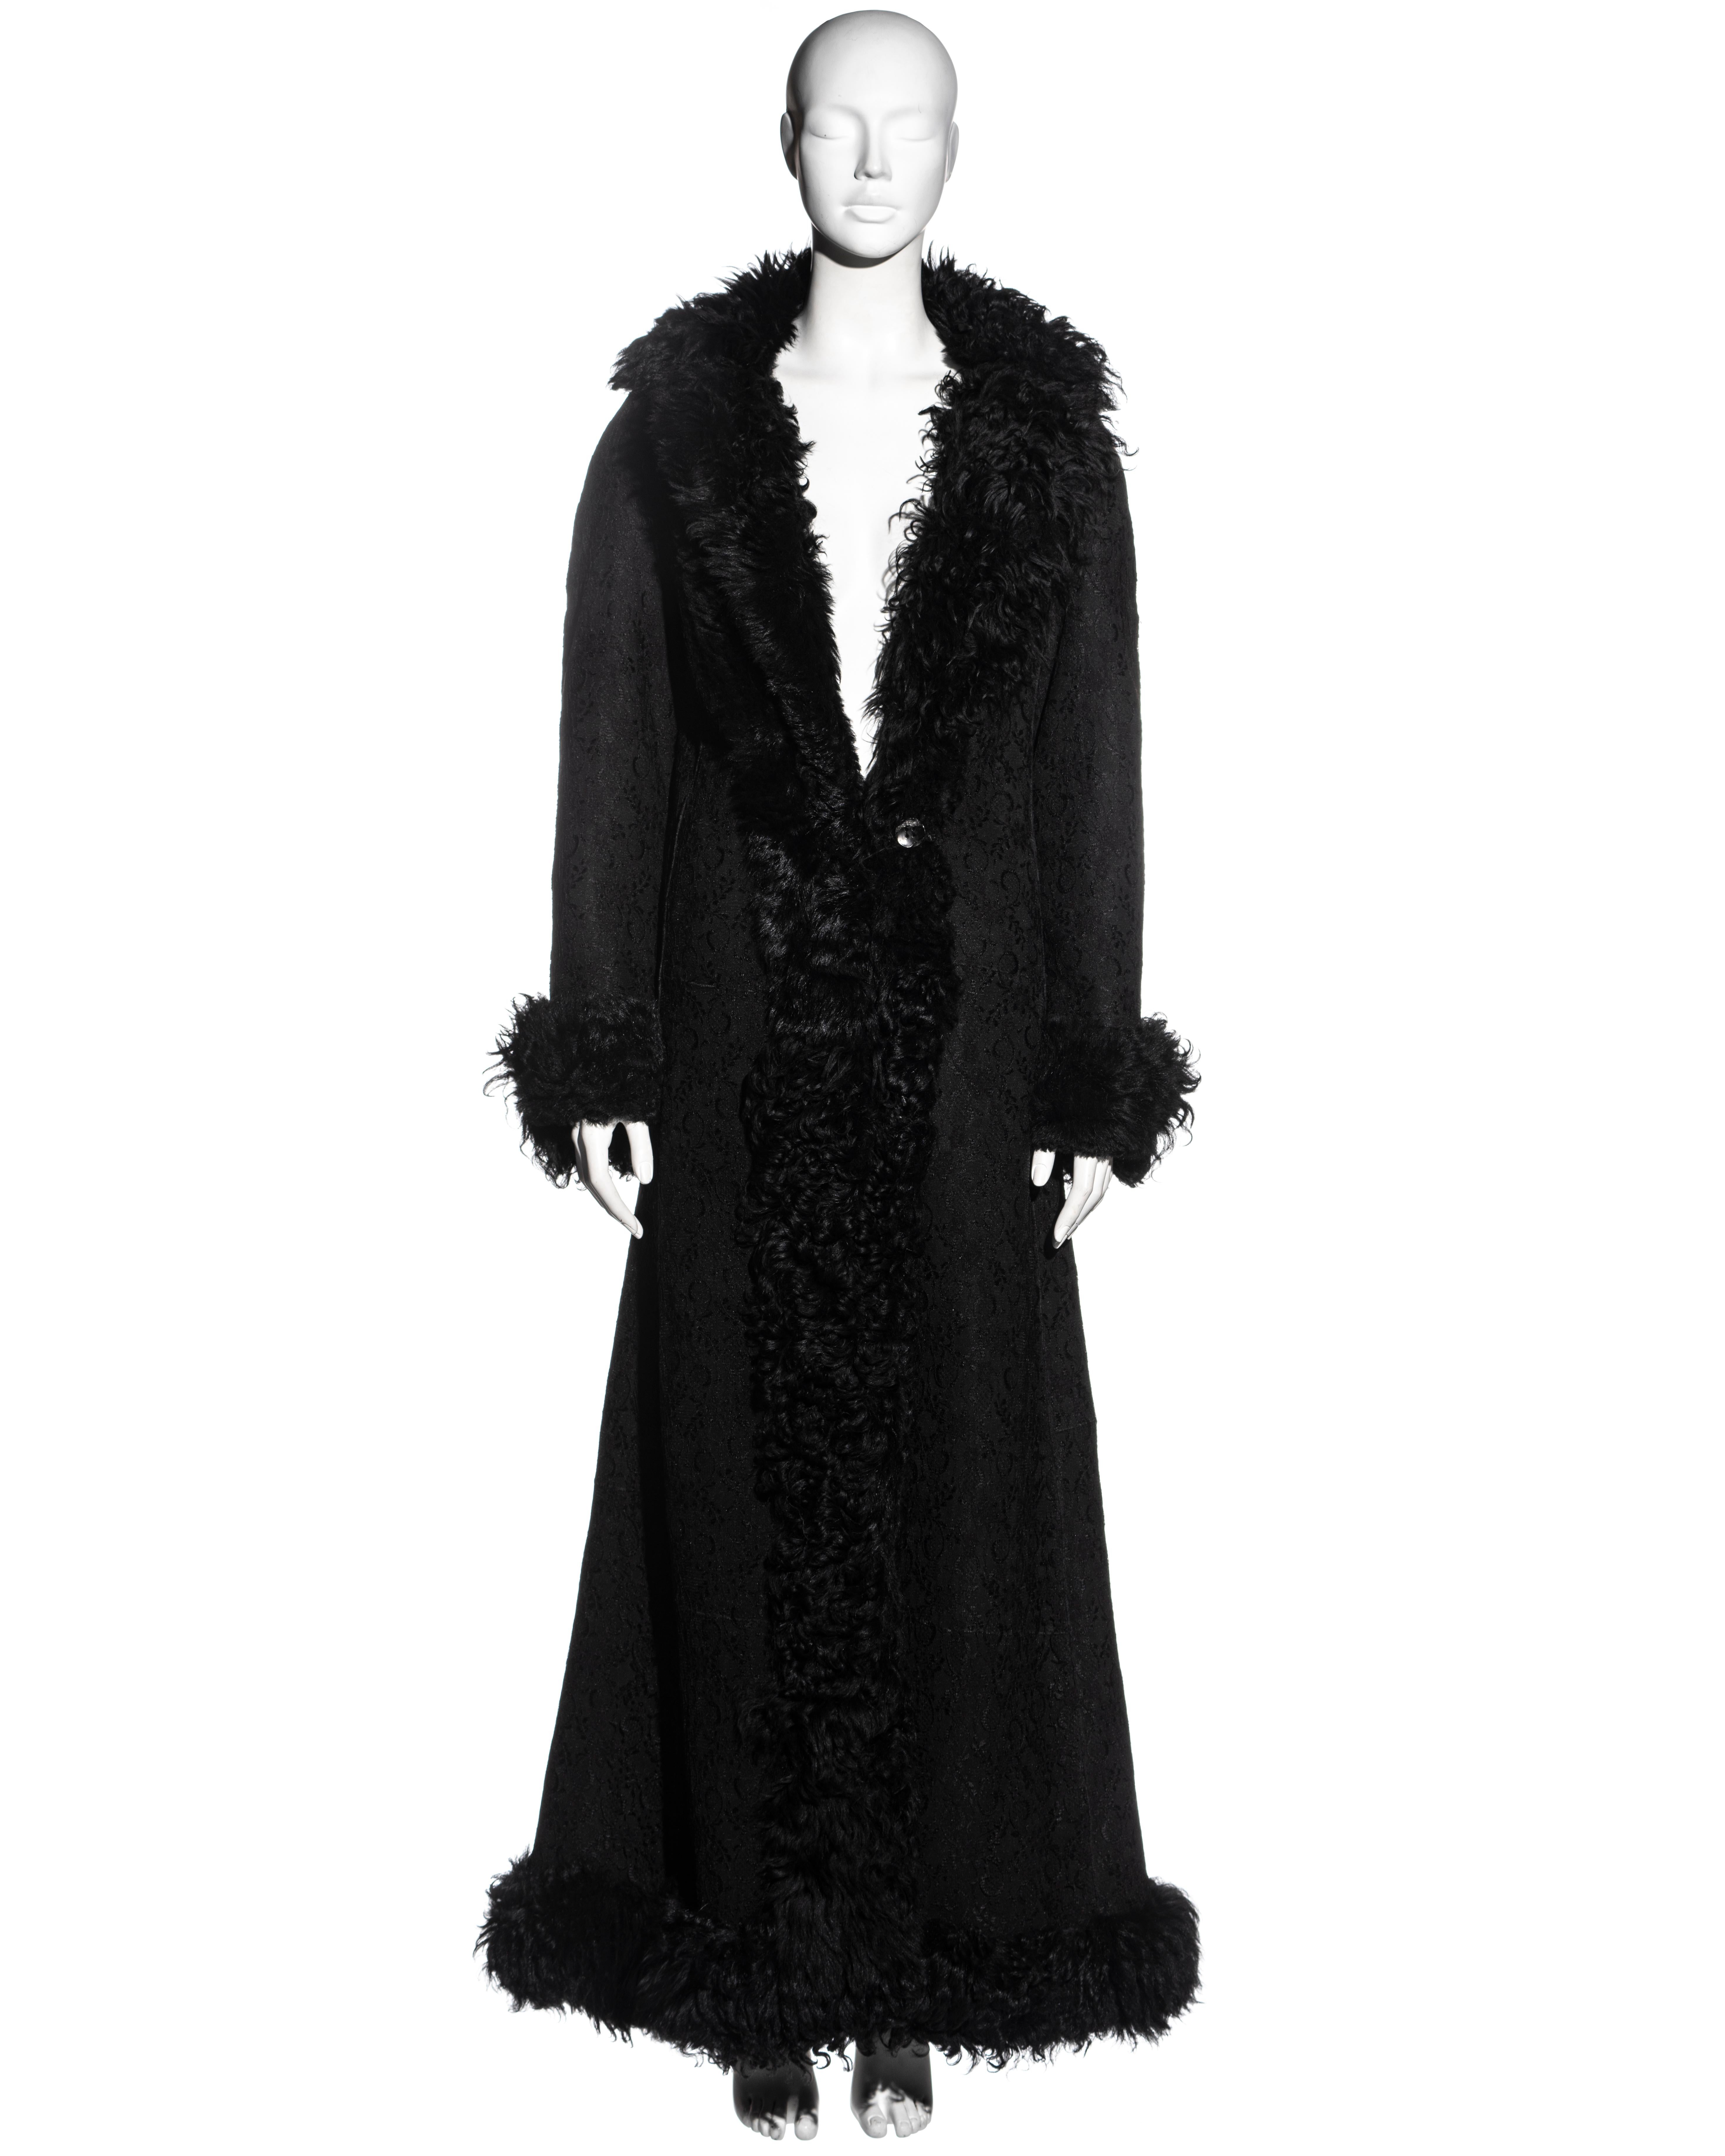 ▪ Christian Dior black full-length coat 
▪ Designed by John Galliano
▪ Mongolian lamb with lace overlay 
▪ Heavyweight
▪ Large button fastening at the waist 
▪ 100% lamb, lace - 100% Nylon
▪ FR 40 - UK 12 - US 8
▪ Fall-Winter 2001